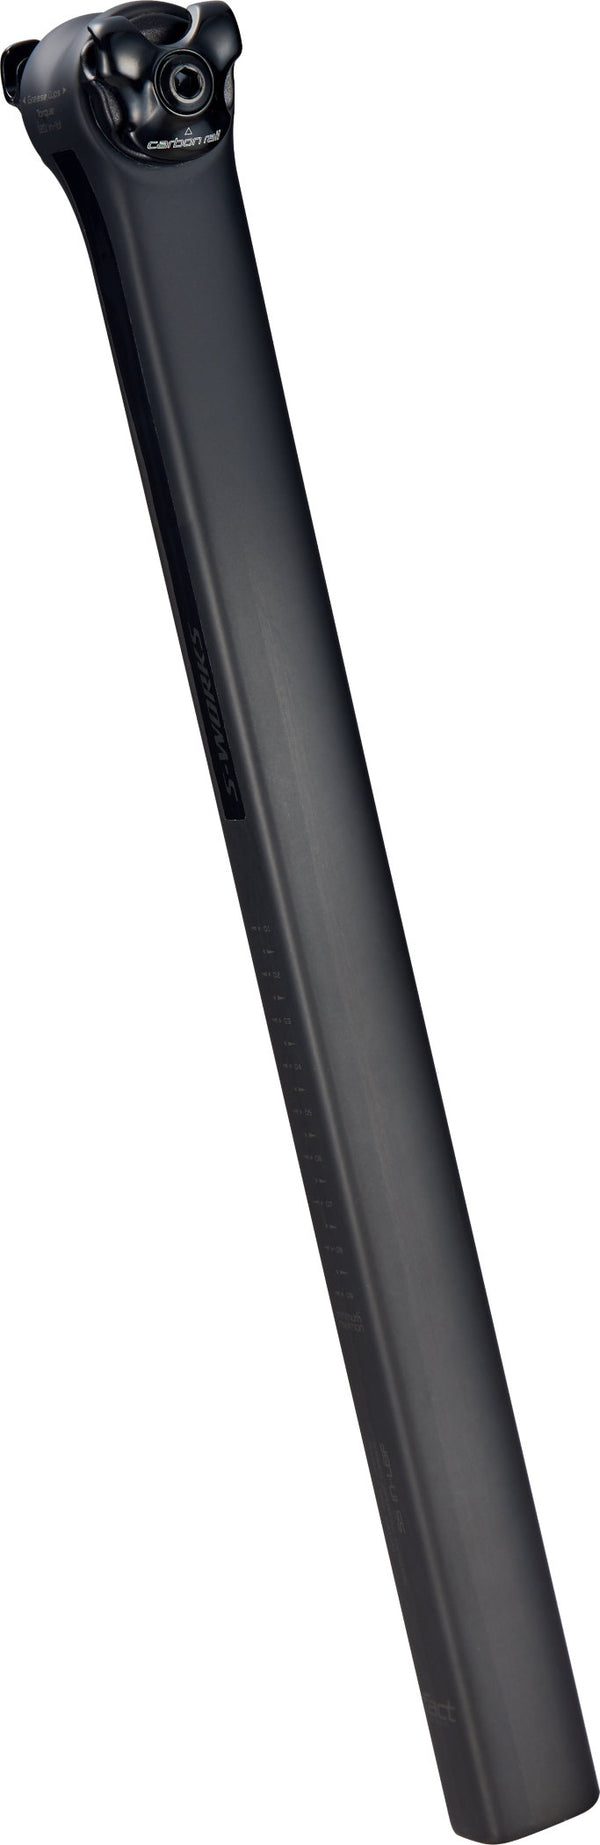 S-Works Pavé SL Carbon Seatpost | Specialized Philippines